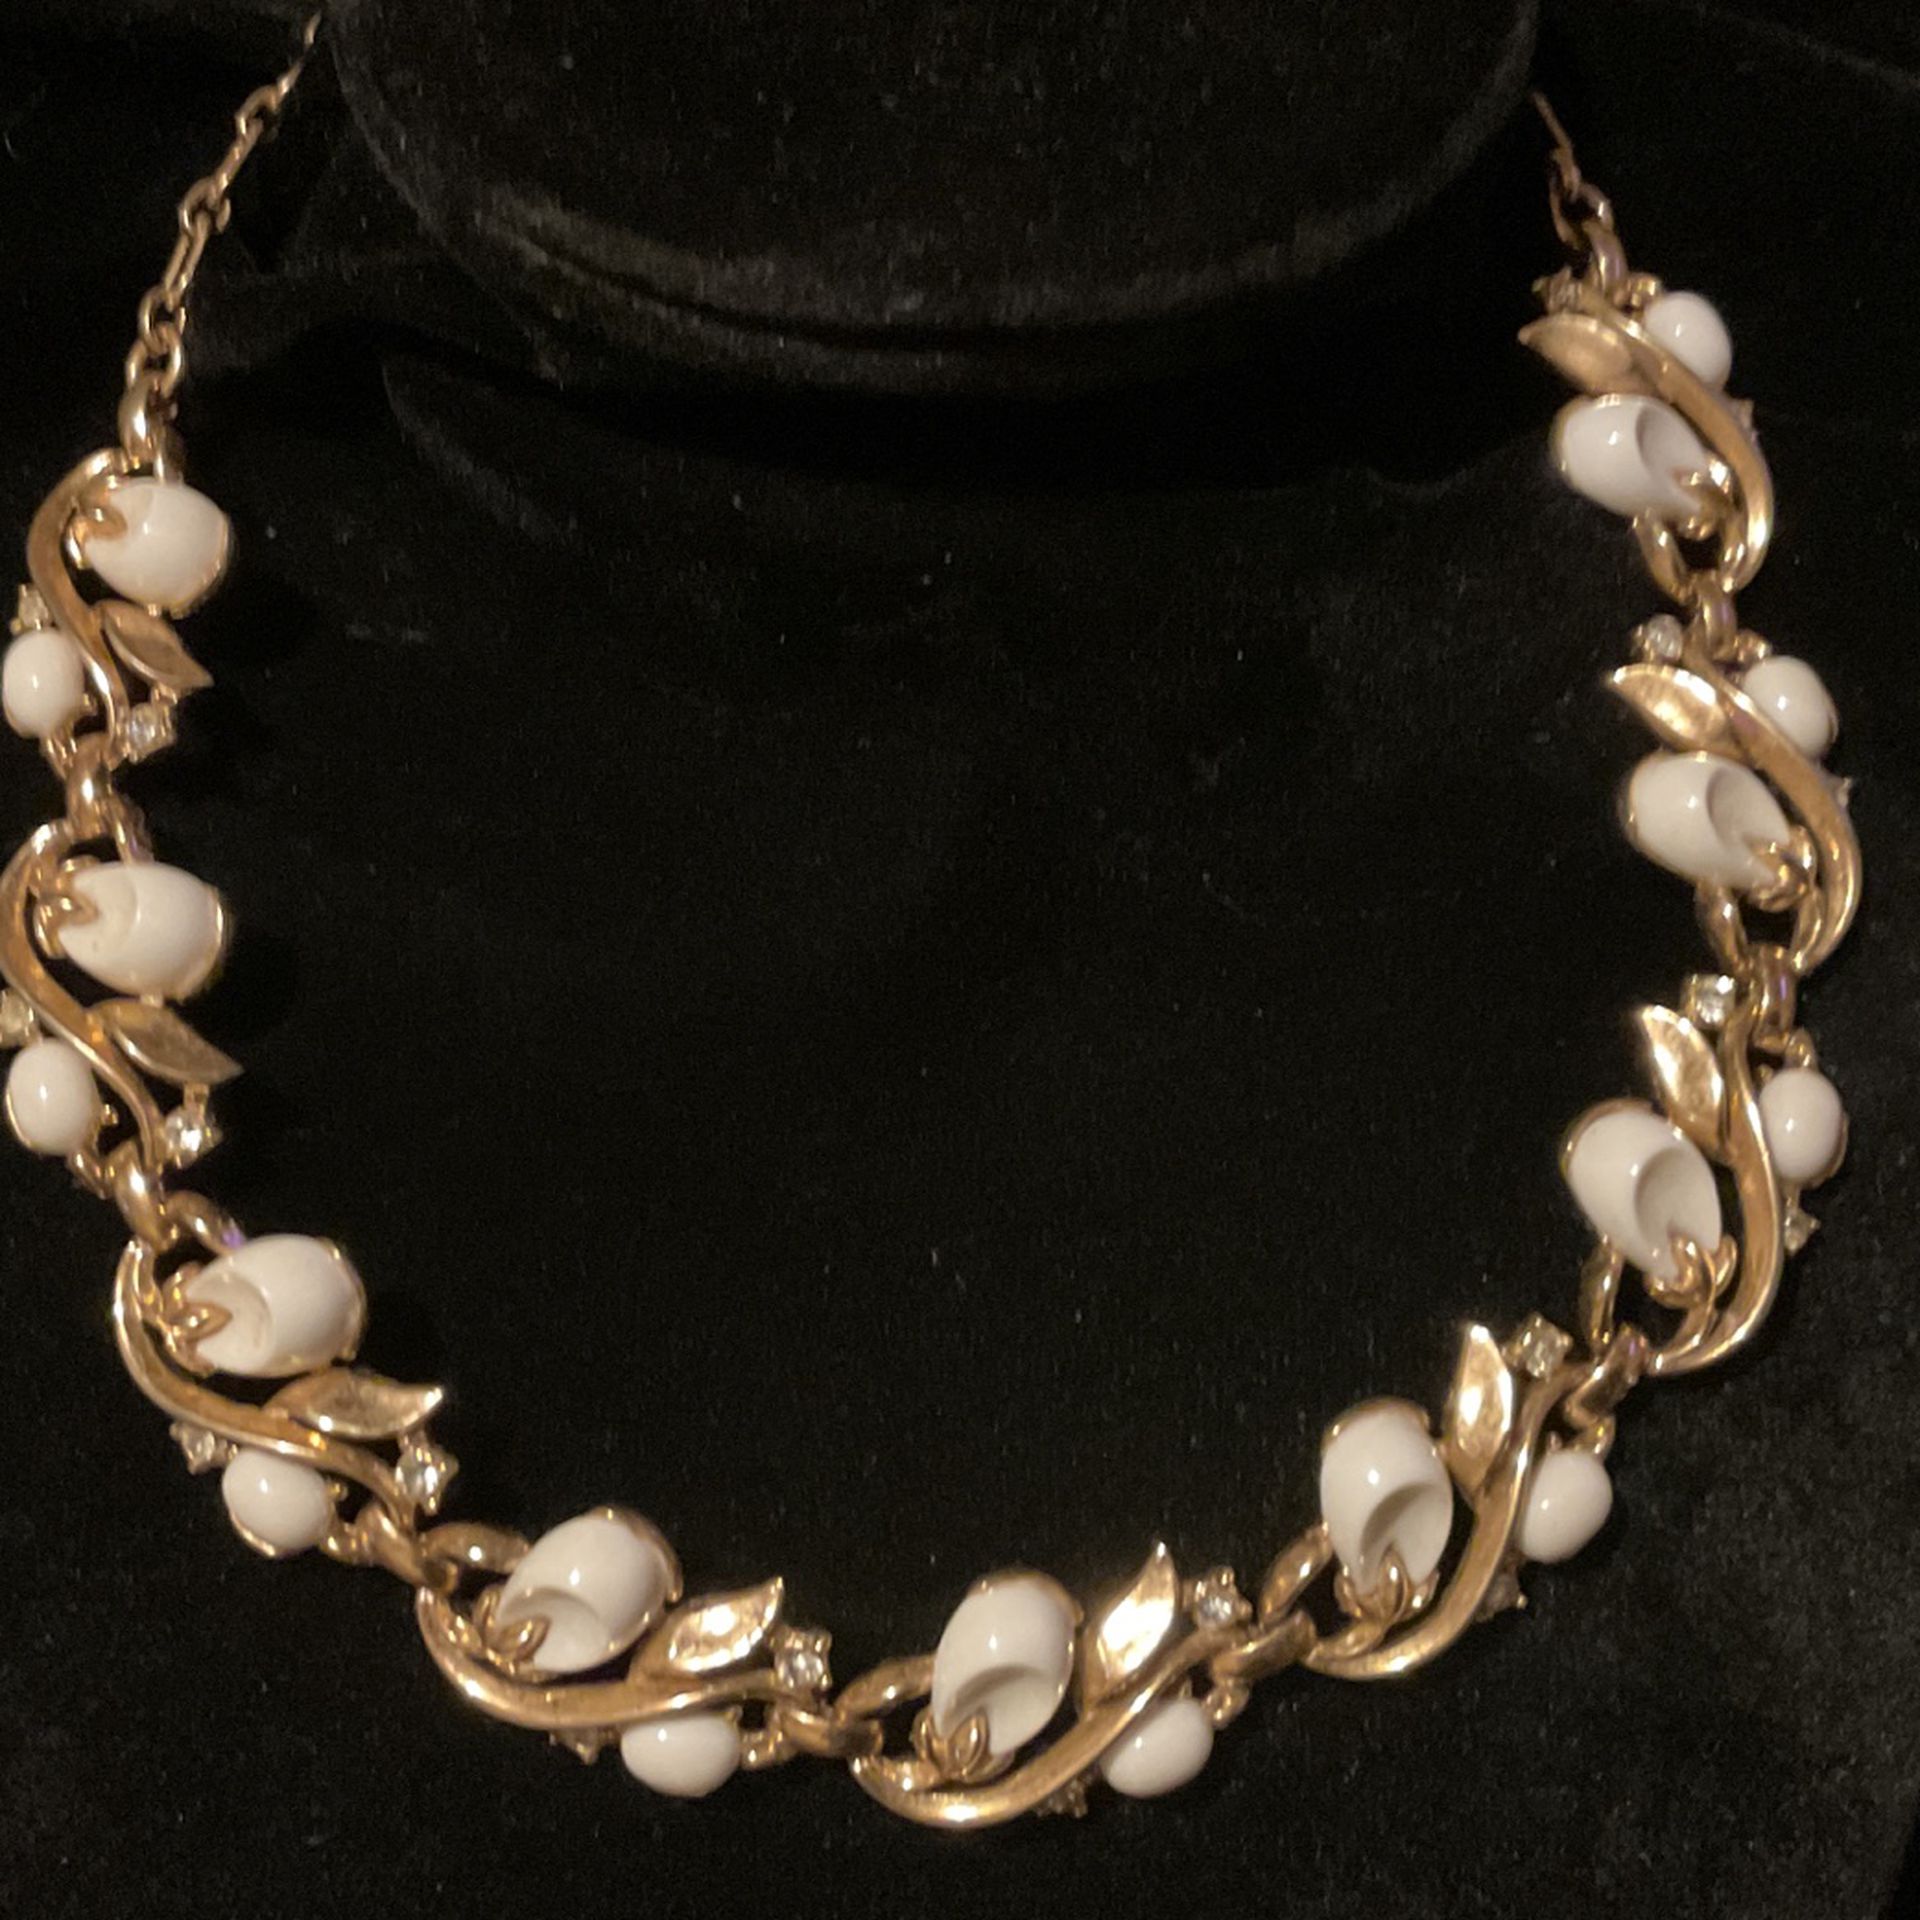 Vintage Trifari 15” Goldtone Choker With Rhinestones And White Accent,By TRIFARI 